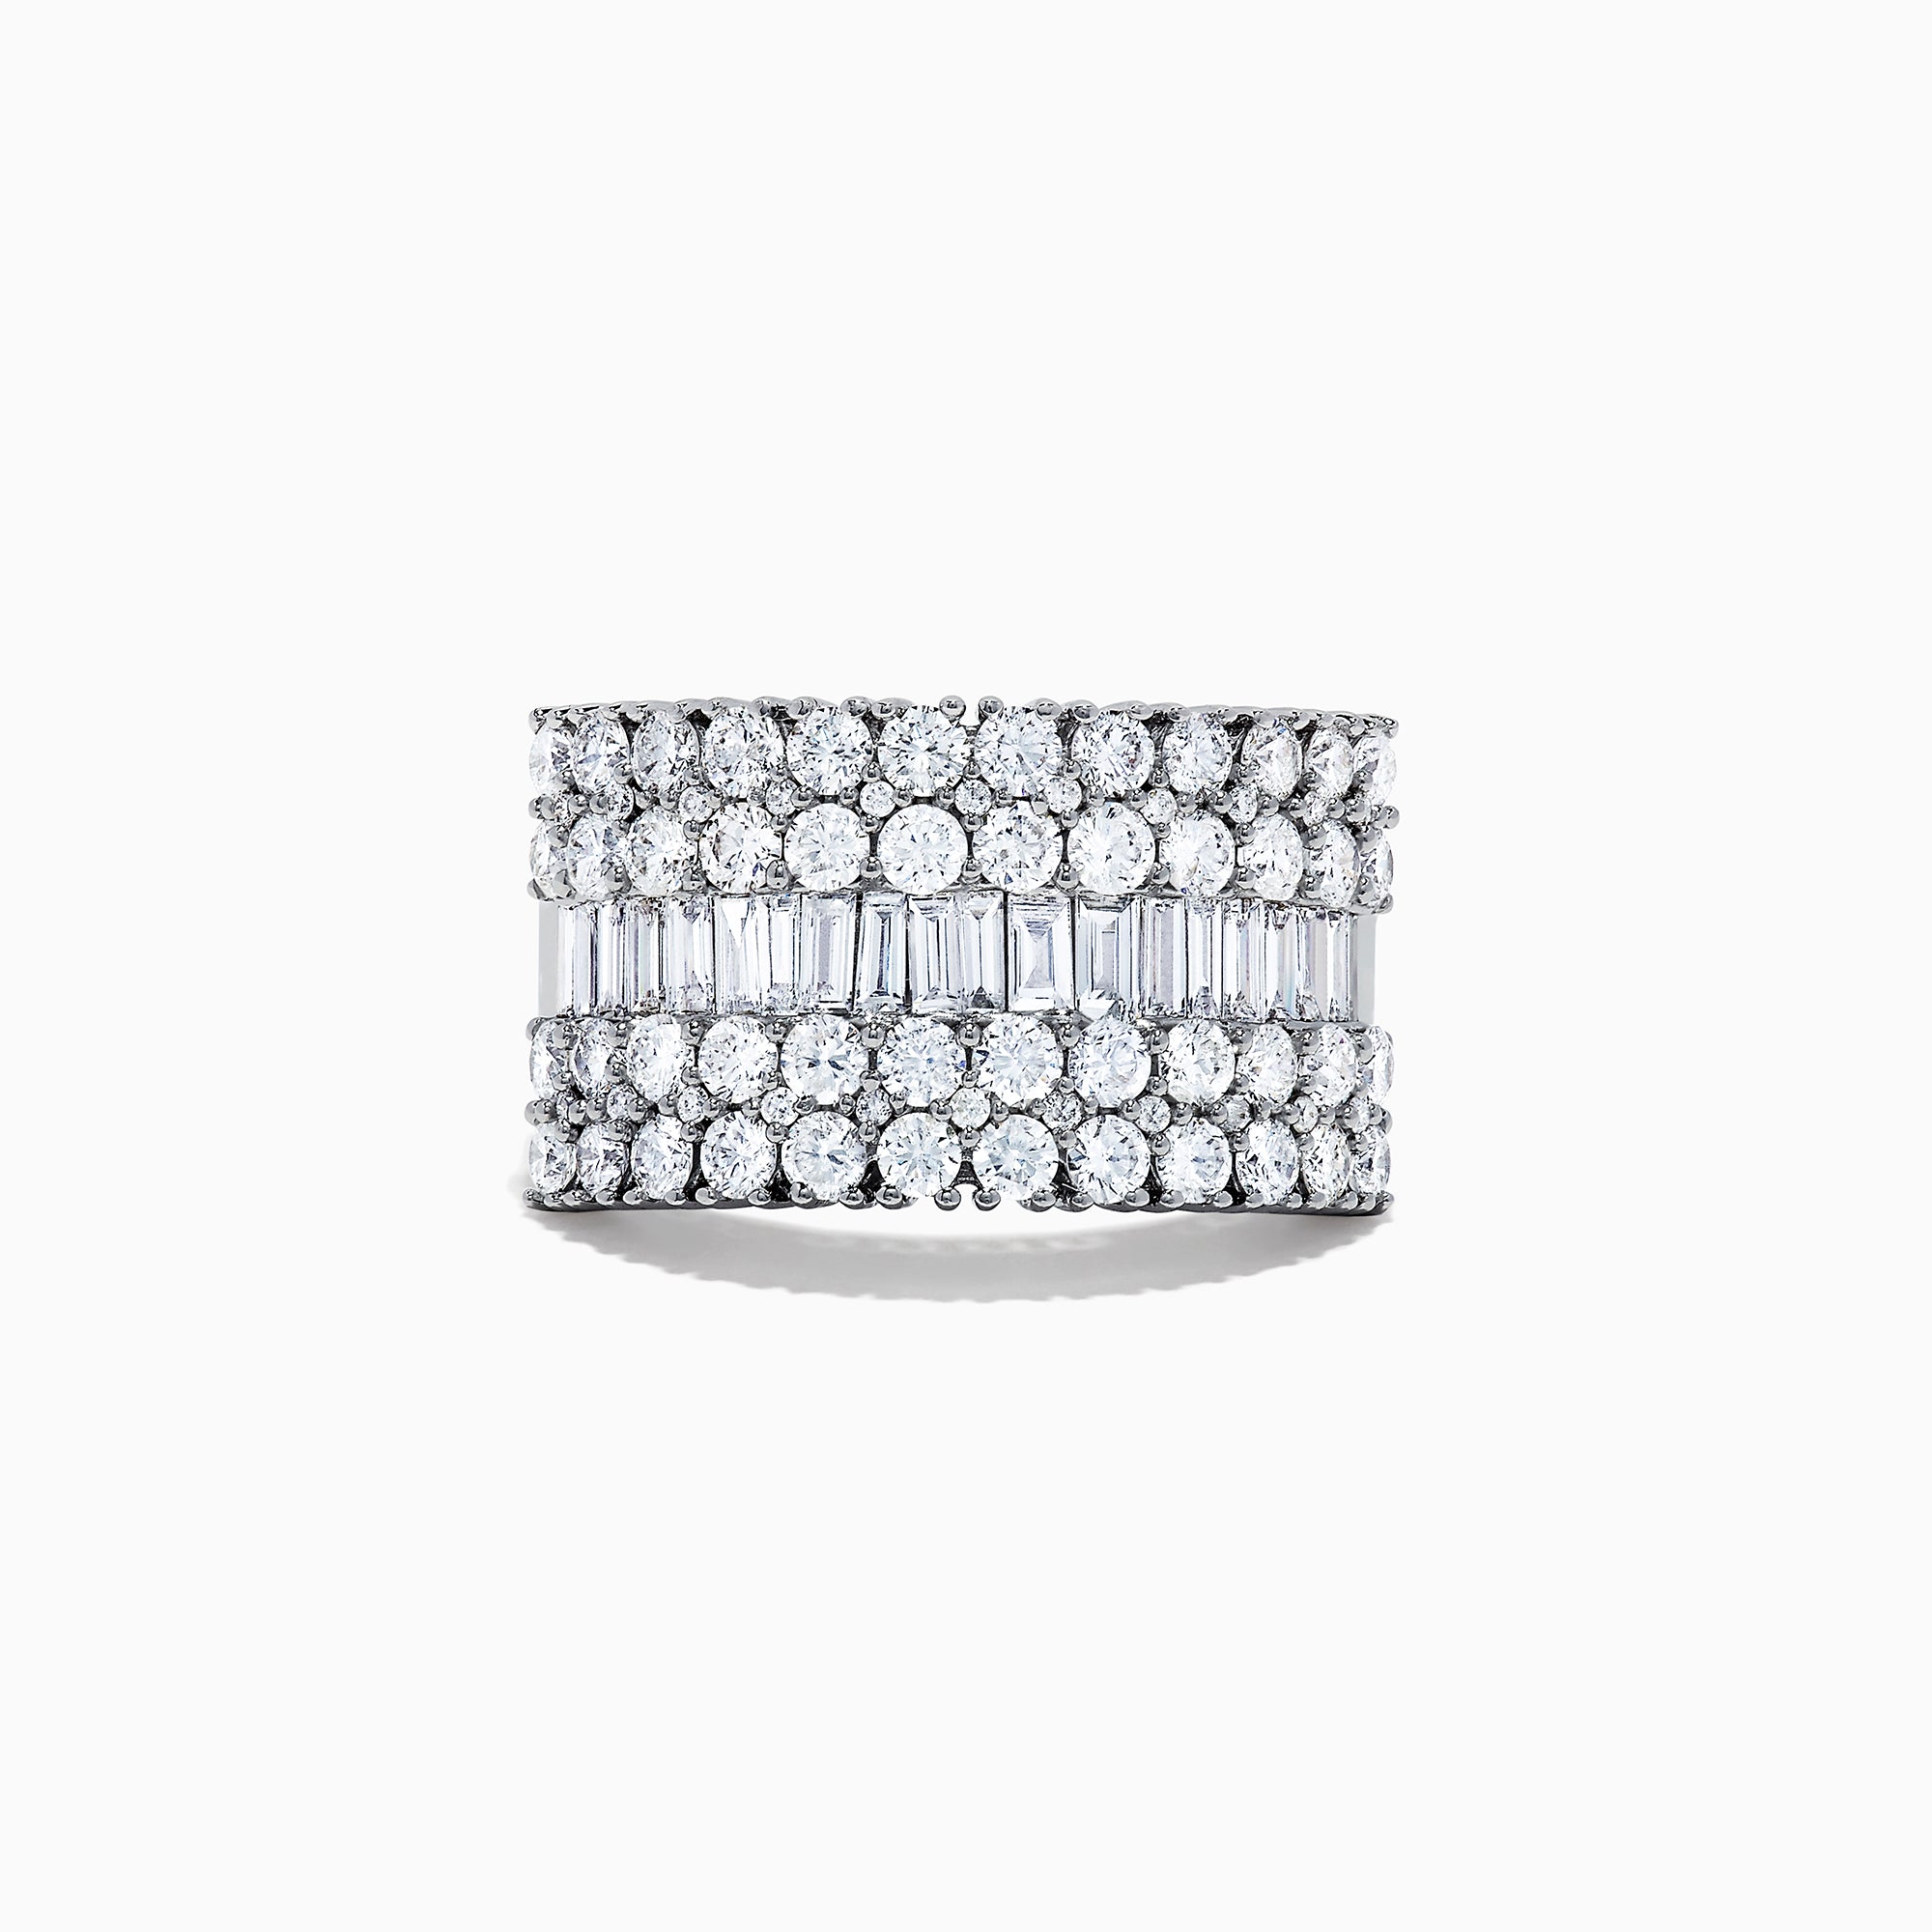 Effy Classique 14K White Gold Diamond Wide Band Ring, 2.47 TCW